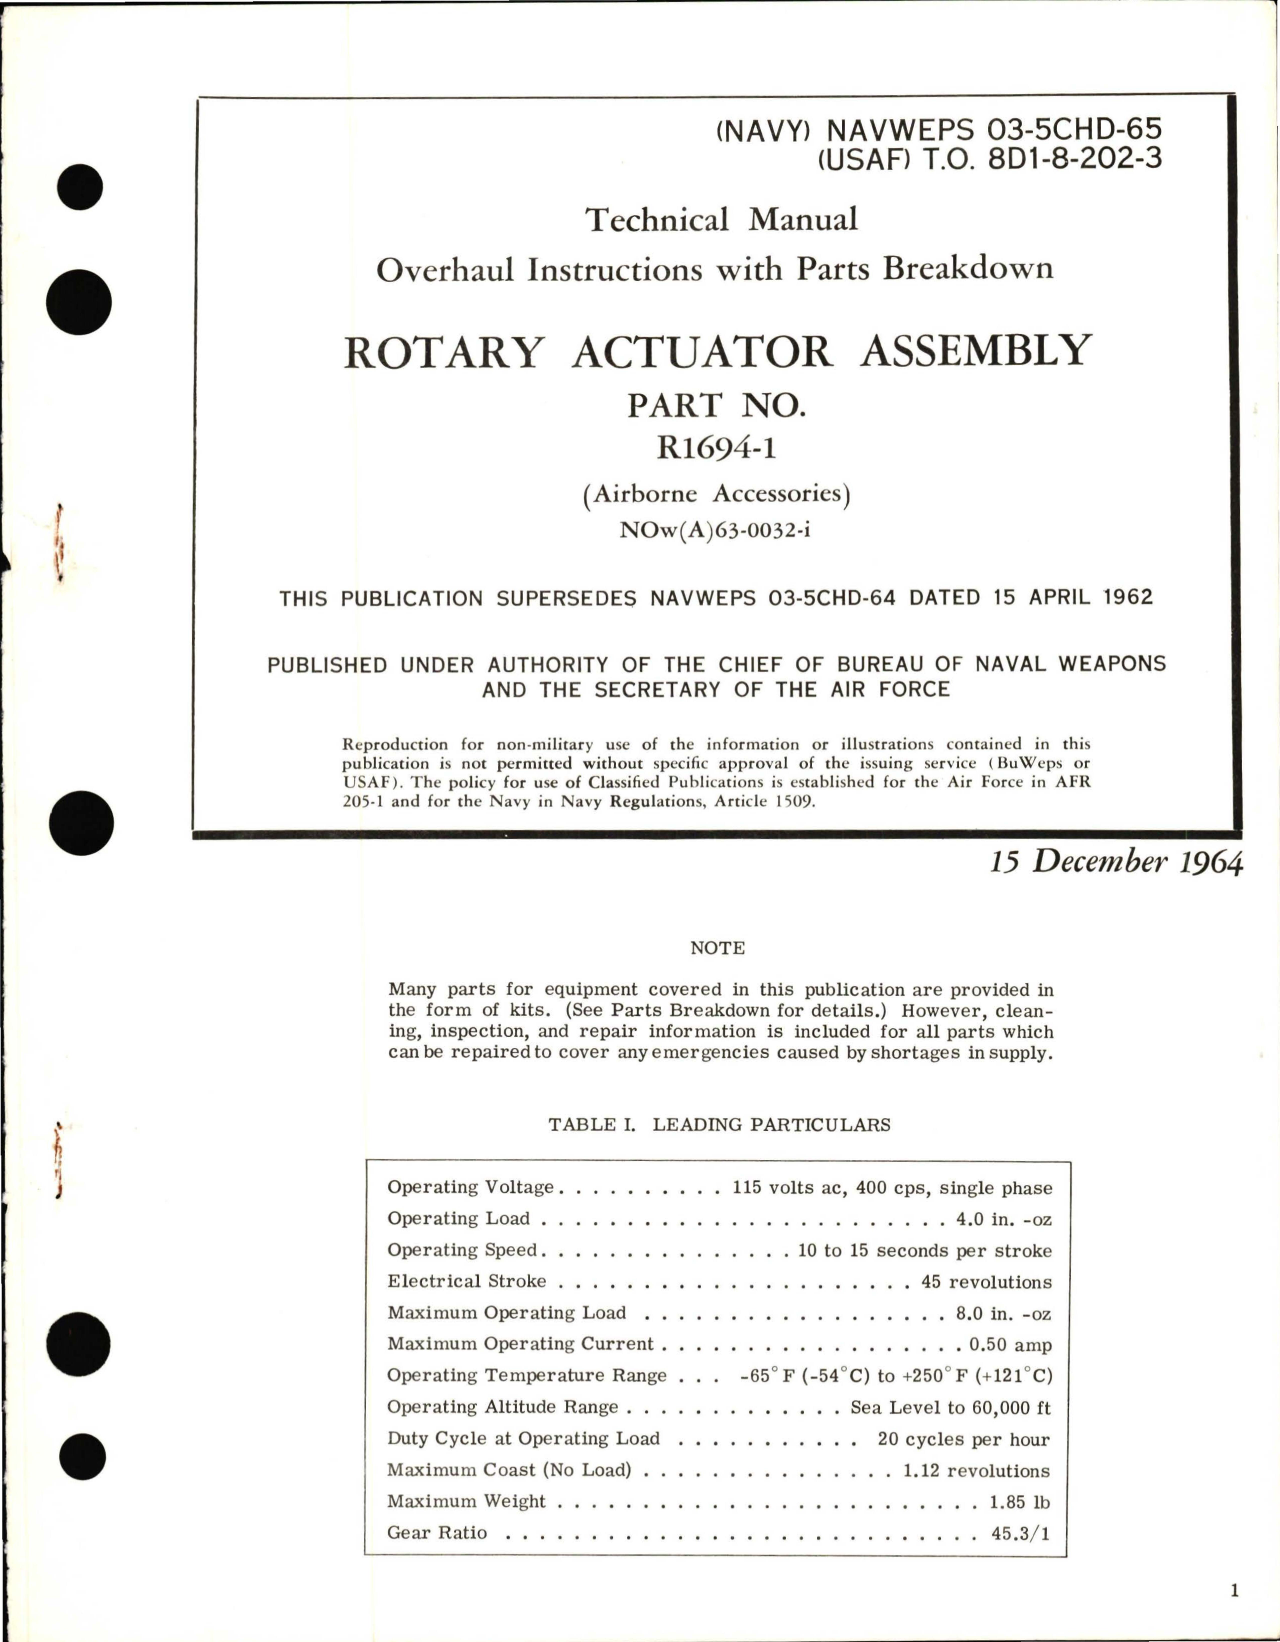 Sample page 1 from AirCorps Library document: Overhaul Instructions with Parts Breakdown for Rotary Actuator Assembly R1694-1